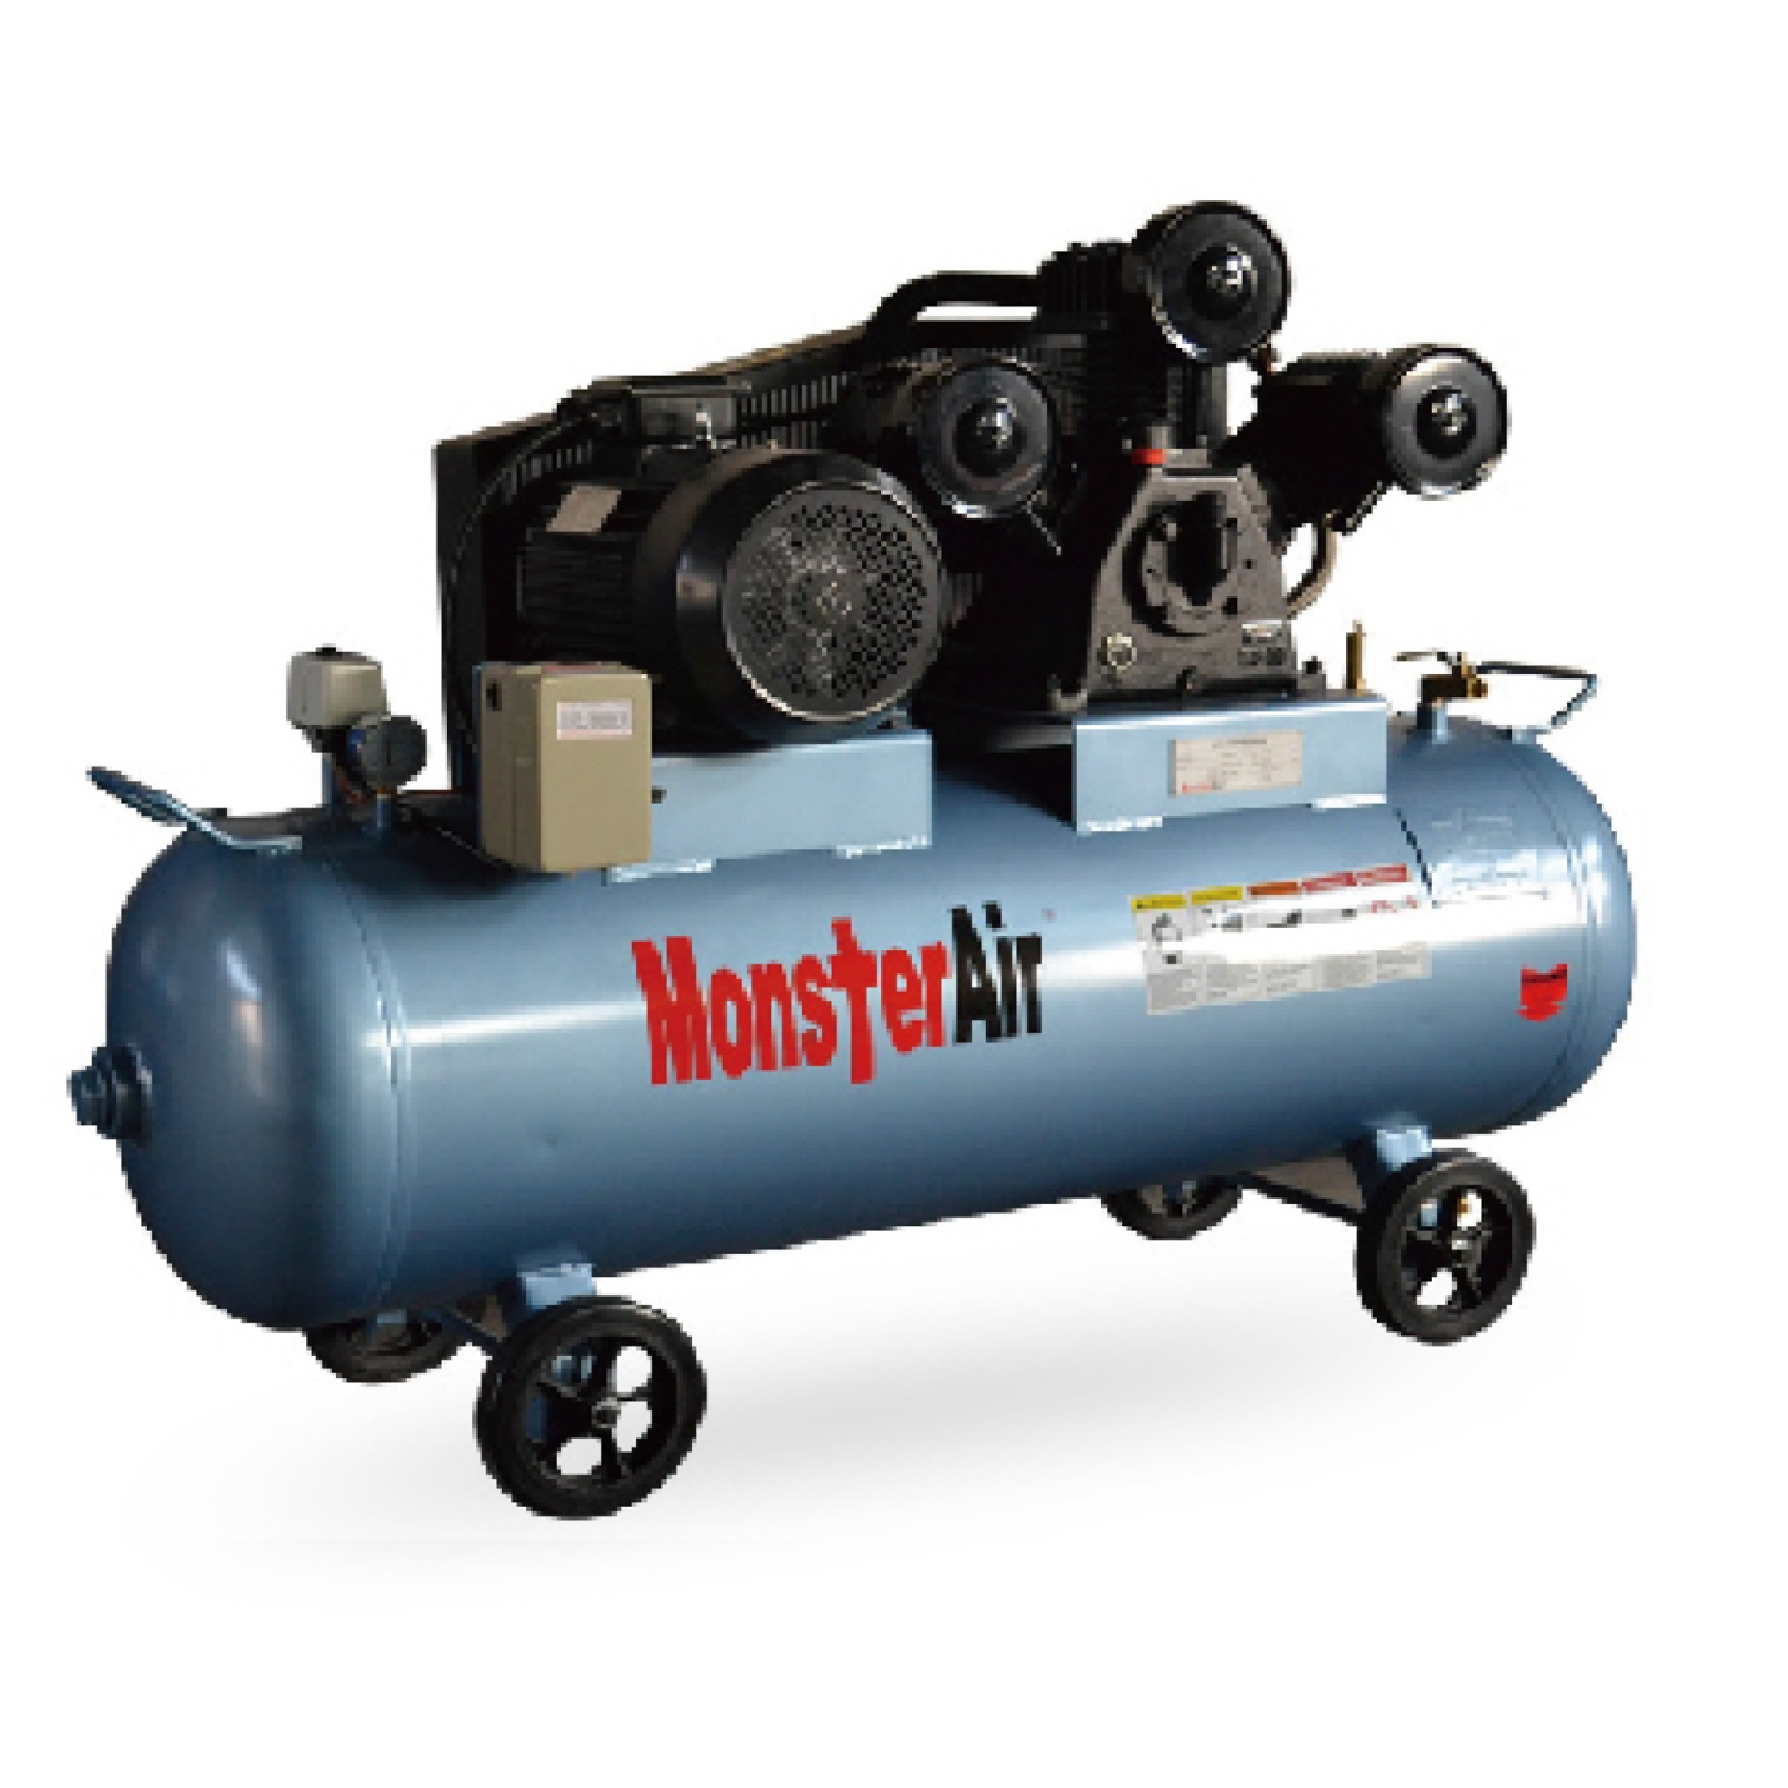 MonsterAir 7.5HP 250L 1 Stage 3 Phase (415V) Air Compressor FS75-250H With MOM Certificate